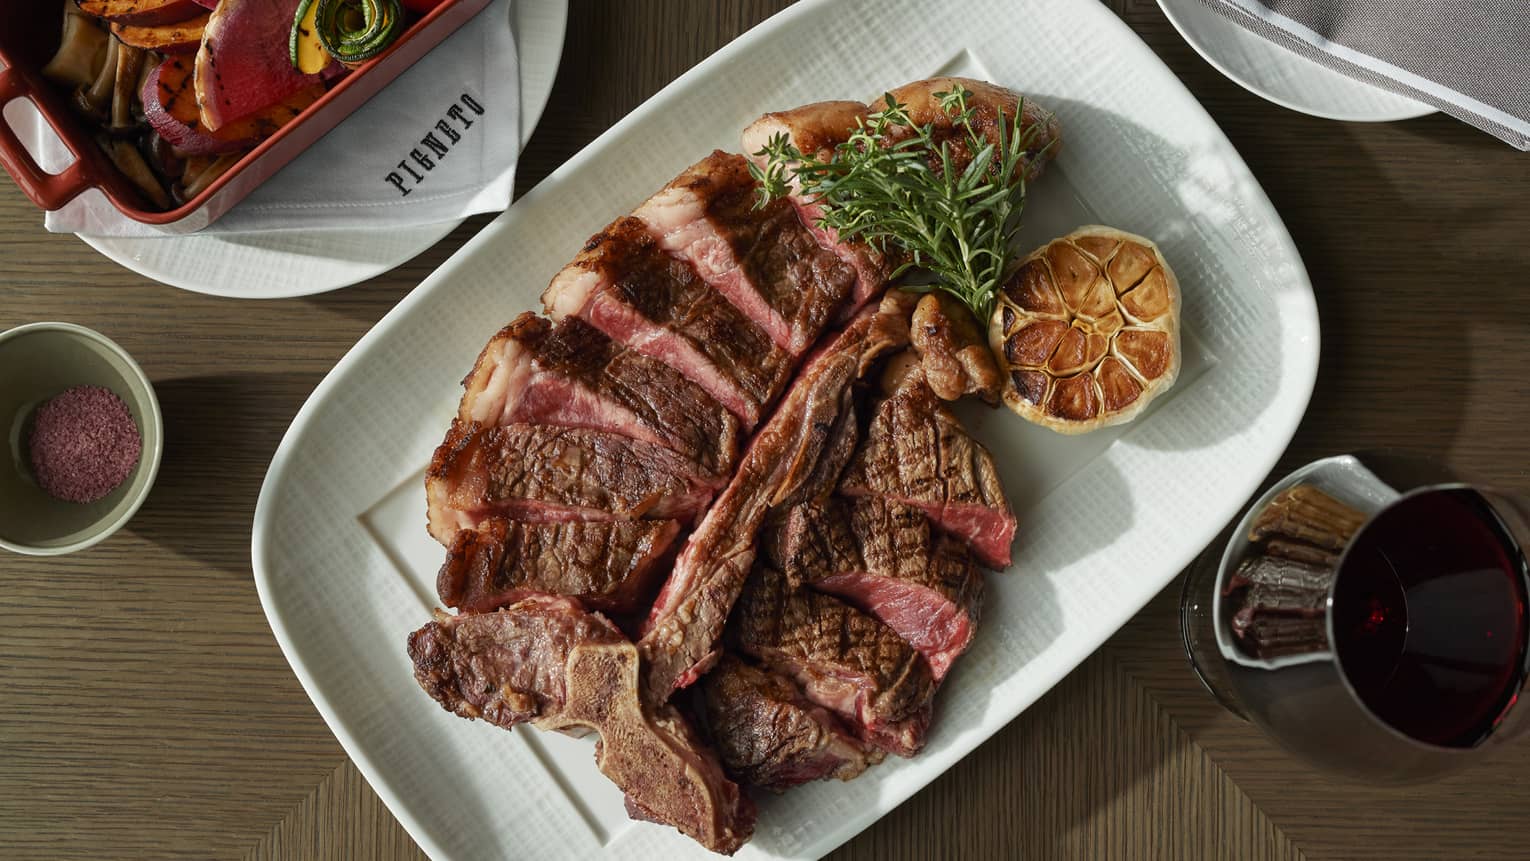 Aerieal view of medium-rare sliced T-bone steak with rosemary and roasted garlic garnishes on rectangular white plate, glass of red wine nearby